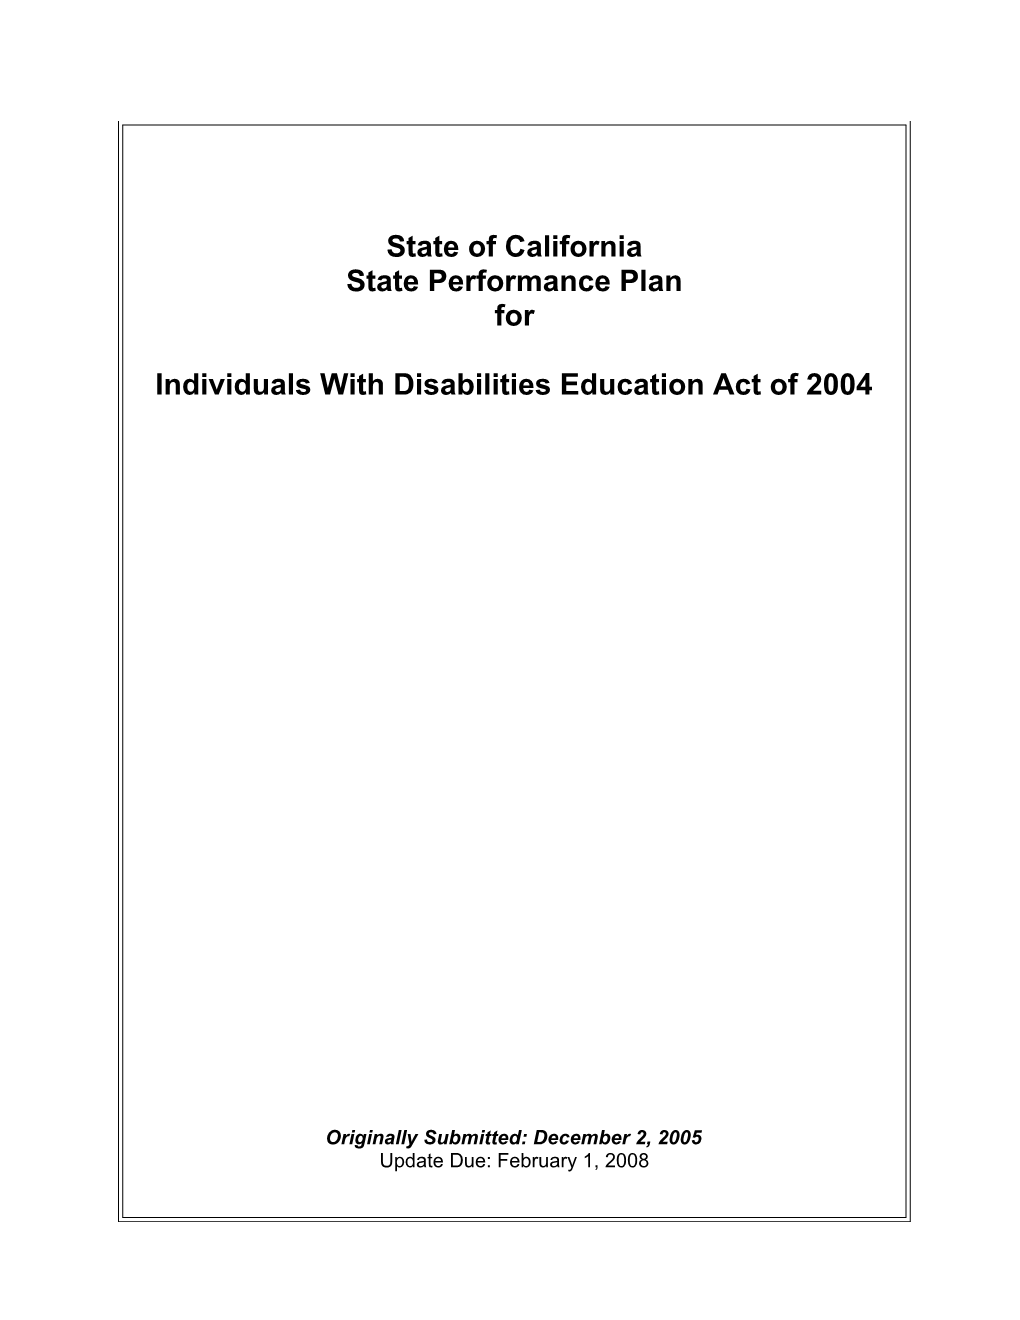 State Performance Plan 2008 - Quality Assurance Process (CA Dept of Education)